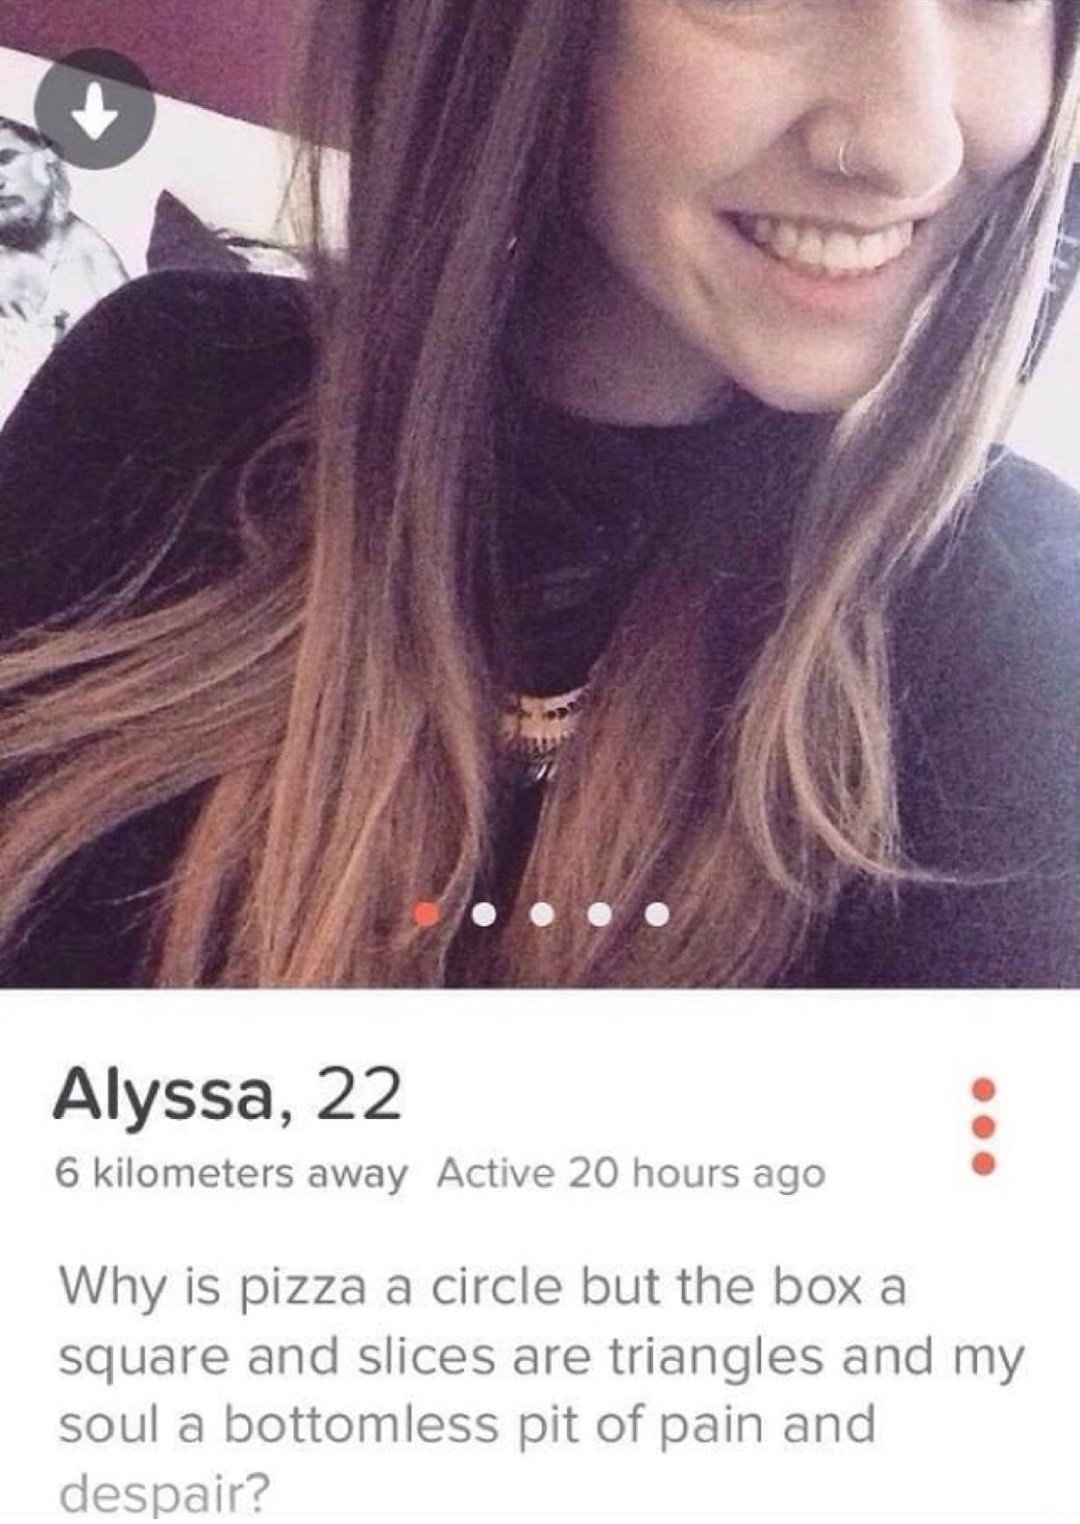 indian girl tinder profile - Alyssa, 22 6 kilometers away Active 20 hours ago Why is pizza a circle but the box a square and slices are triangles and my soul a bottomless pit of pain and despair?